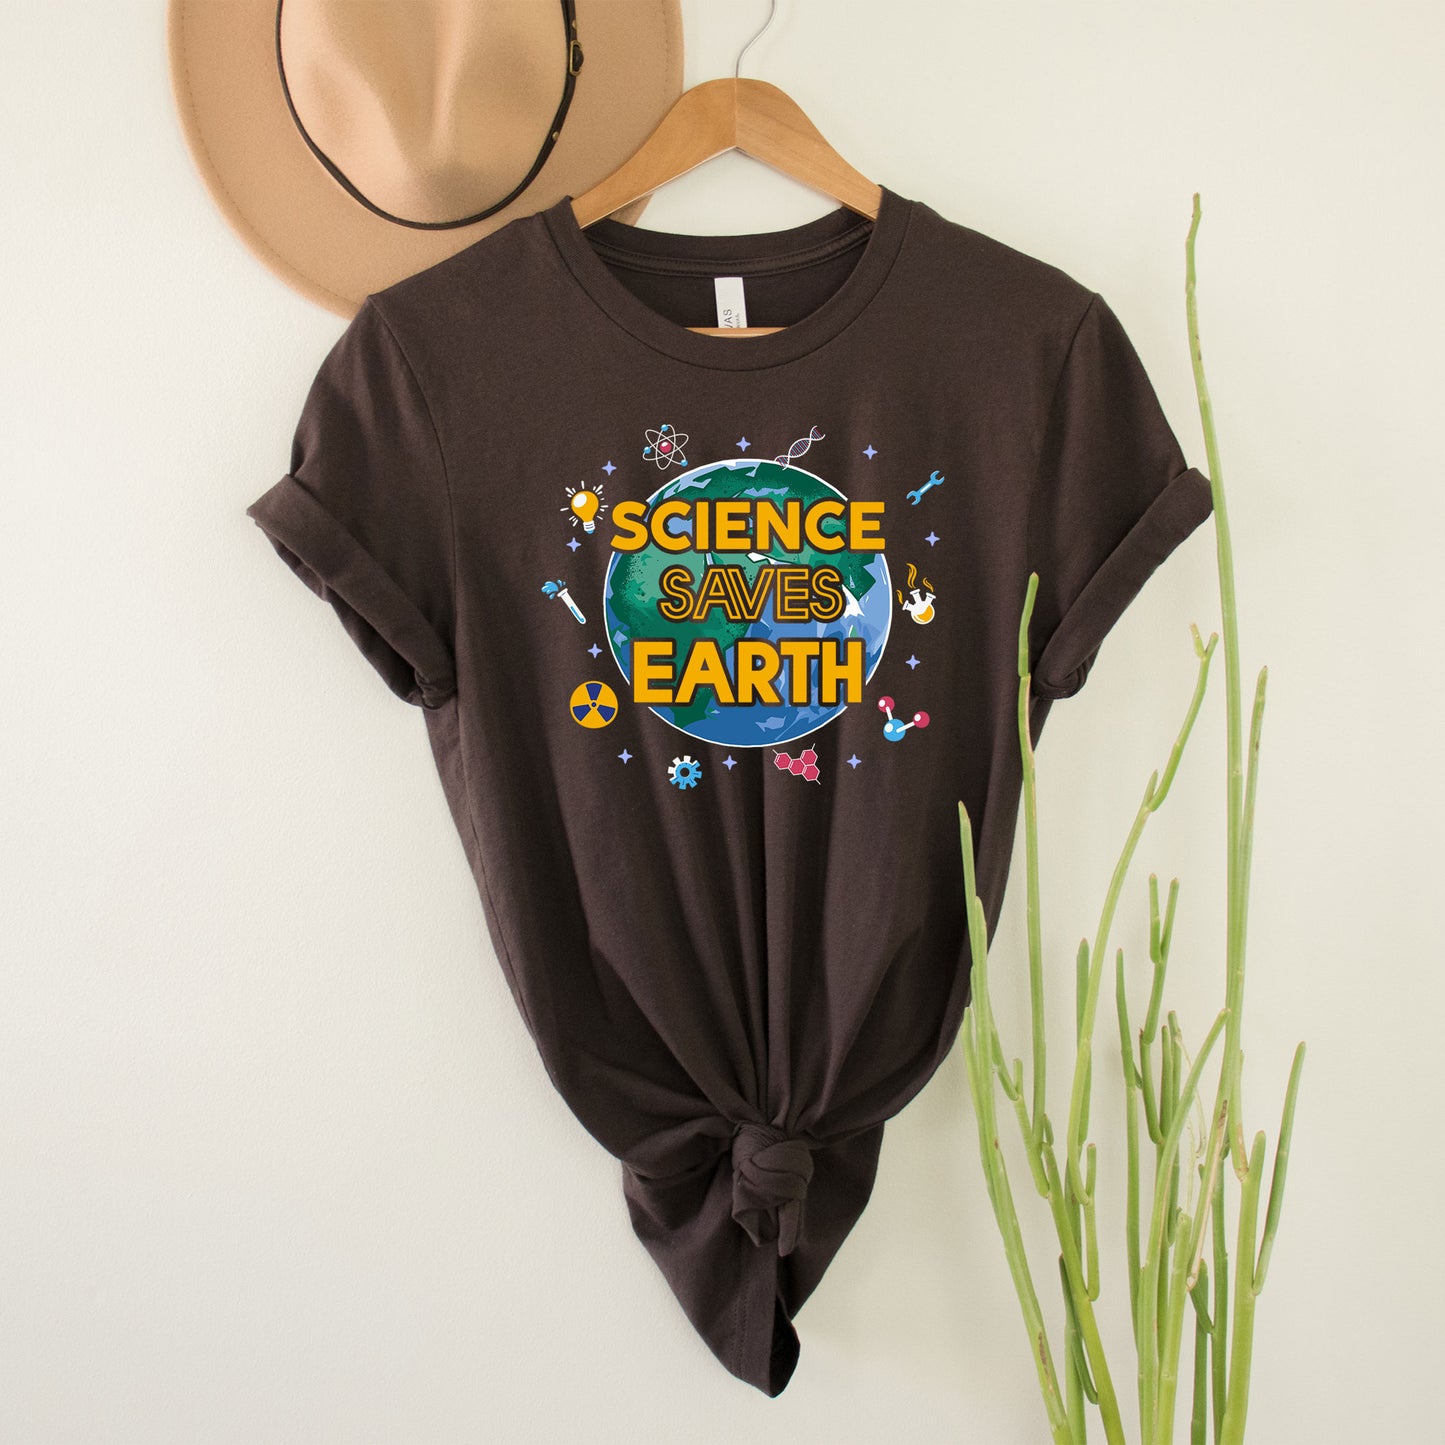 Science Saves Earth Shirt, Middle High School Science Teacher Gift Bday College Science Students Tee, College Undergrad Professor Earth Week